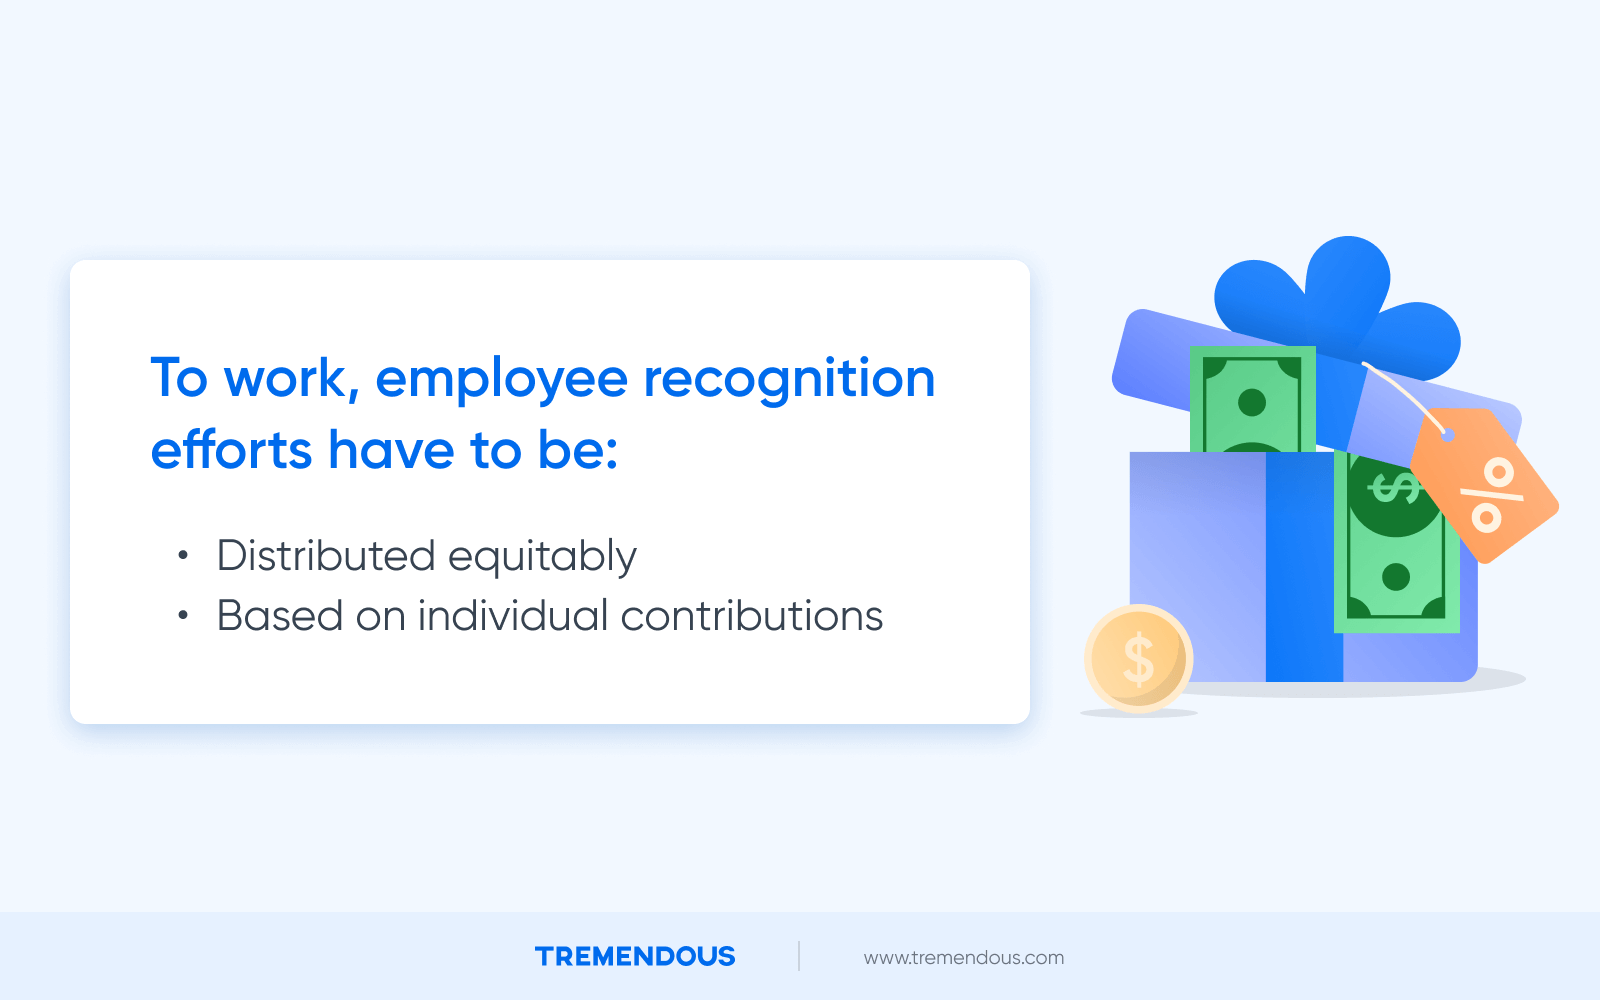 A text box that reads: "To work, employee recognition efforts have to be: Distributed equitably and based on individual contributions."